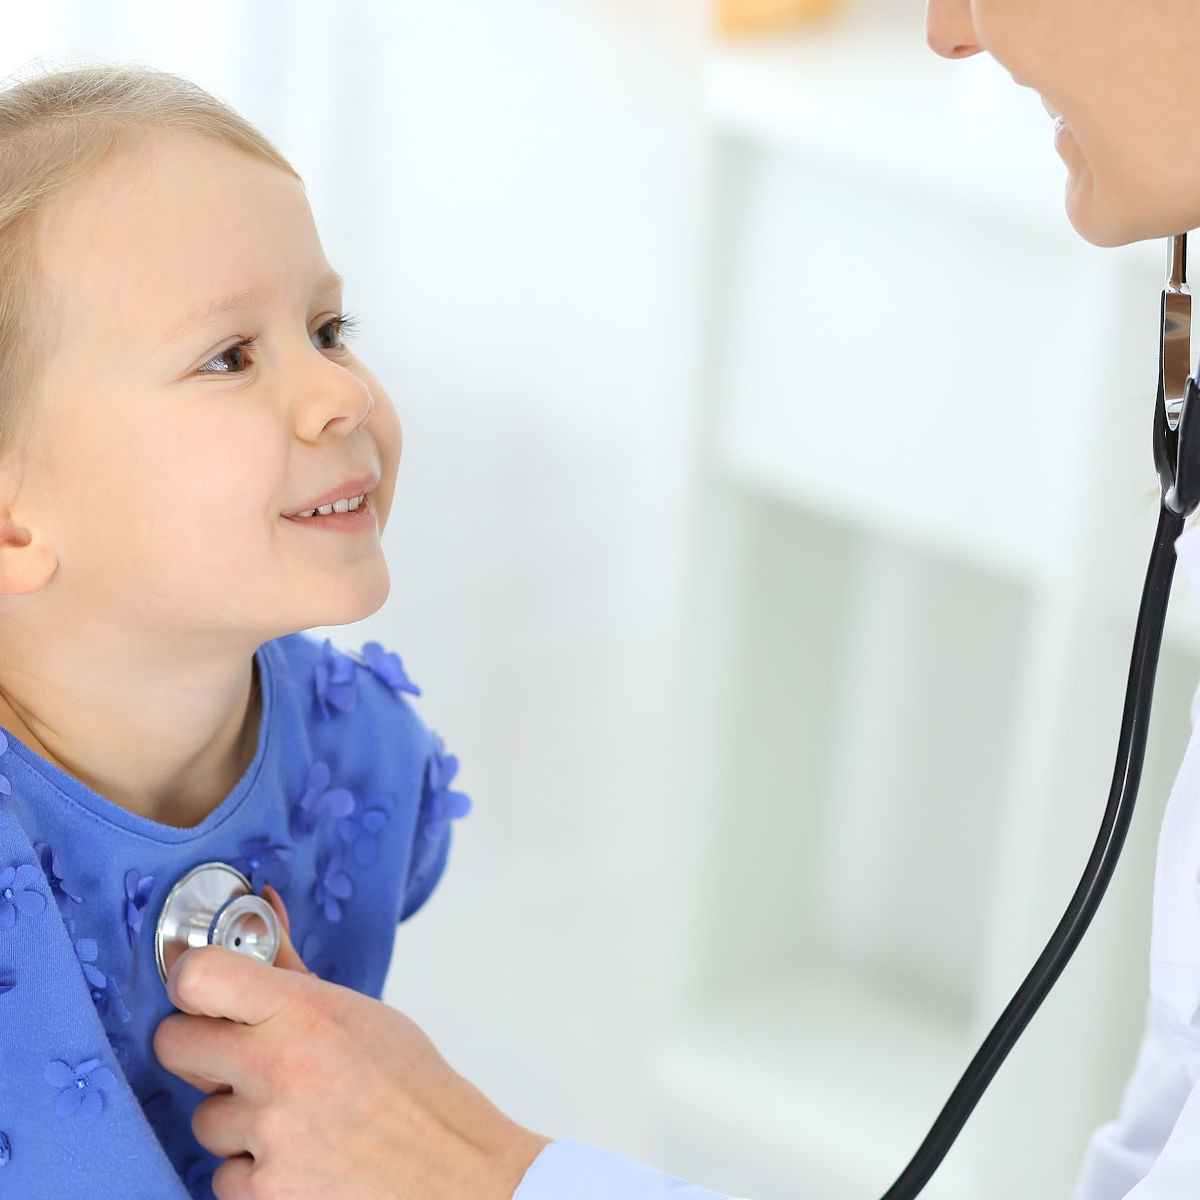 Prioritizing Timely and Specialized Care through Pediatric Urgent Services